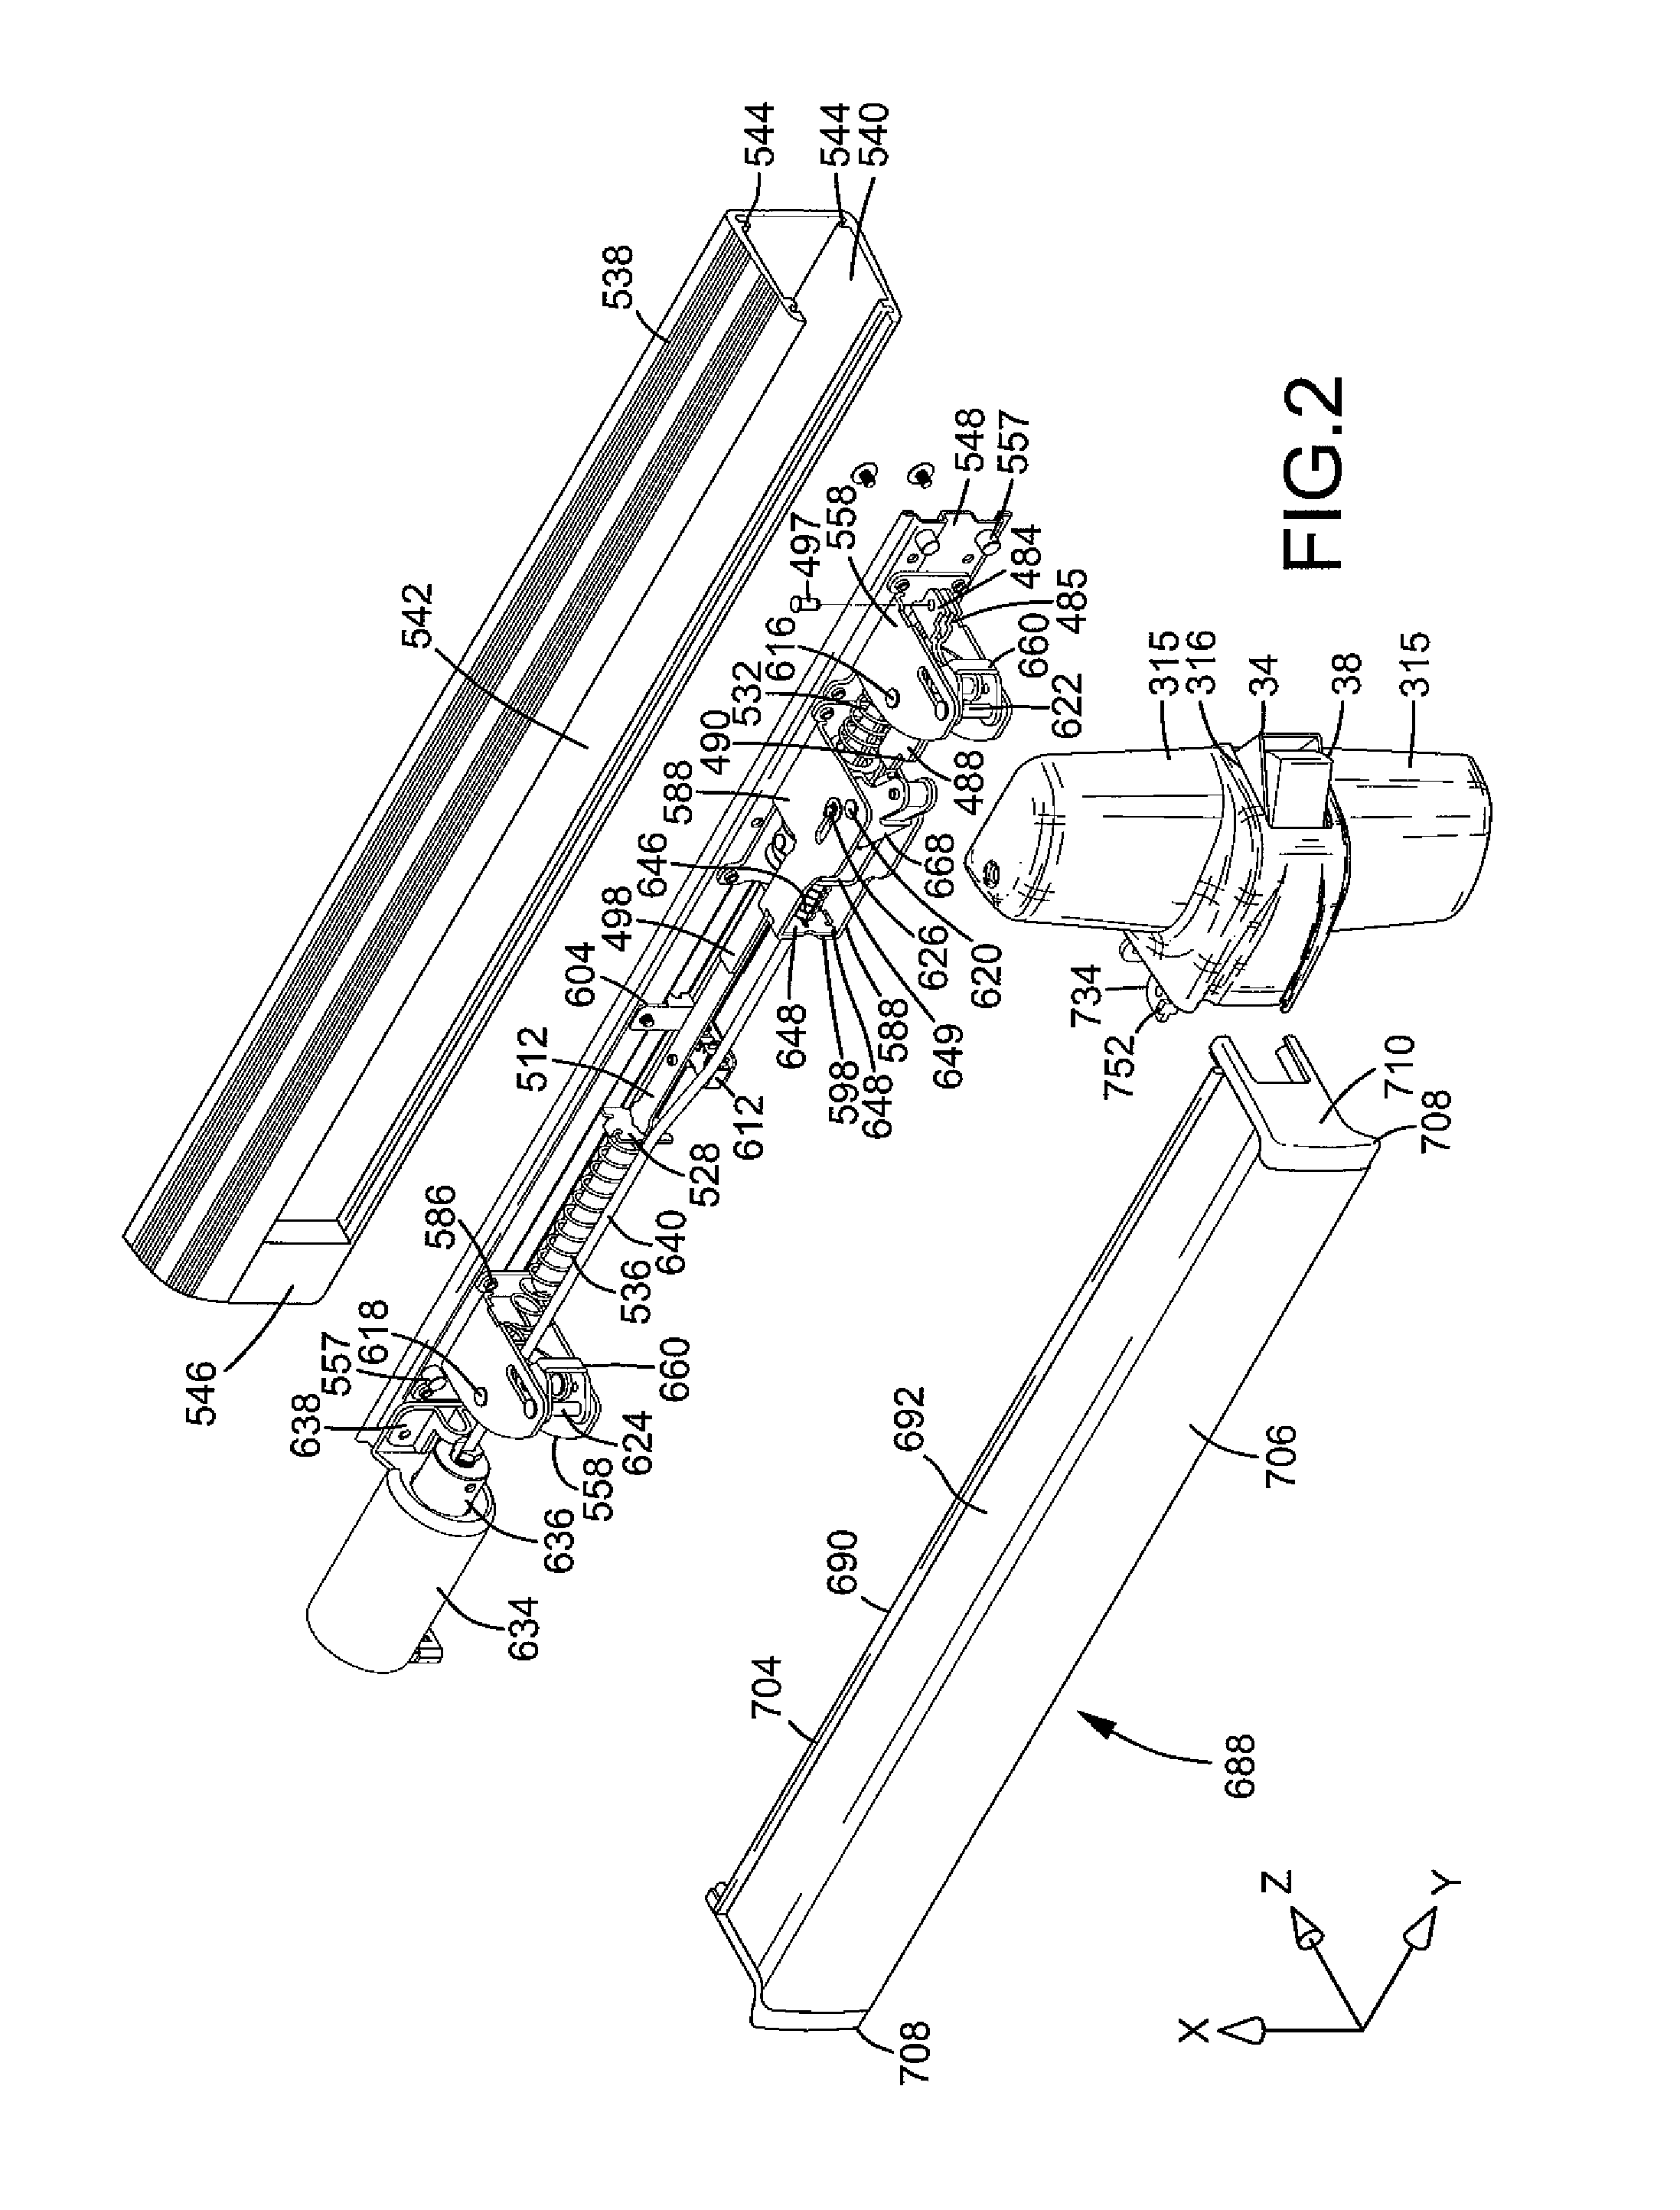 Door lock with idle travel in a locking state